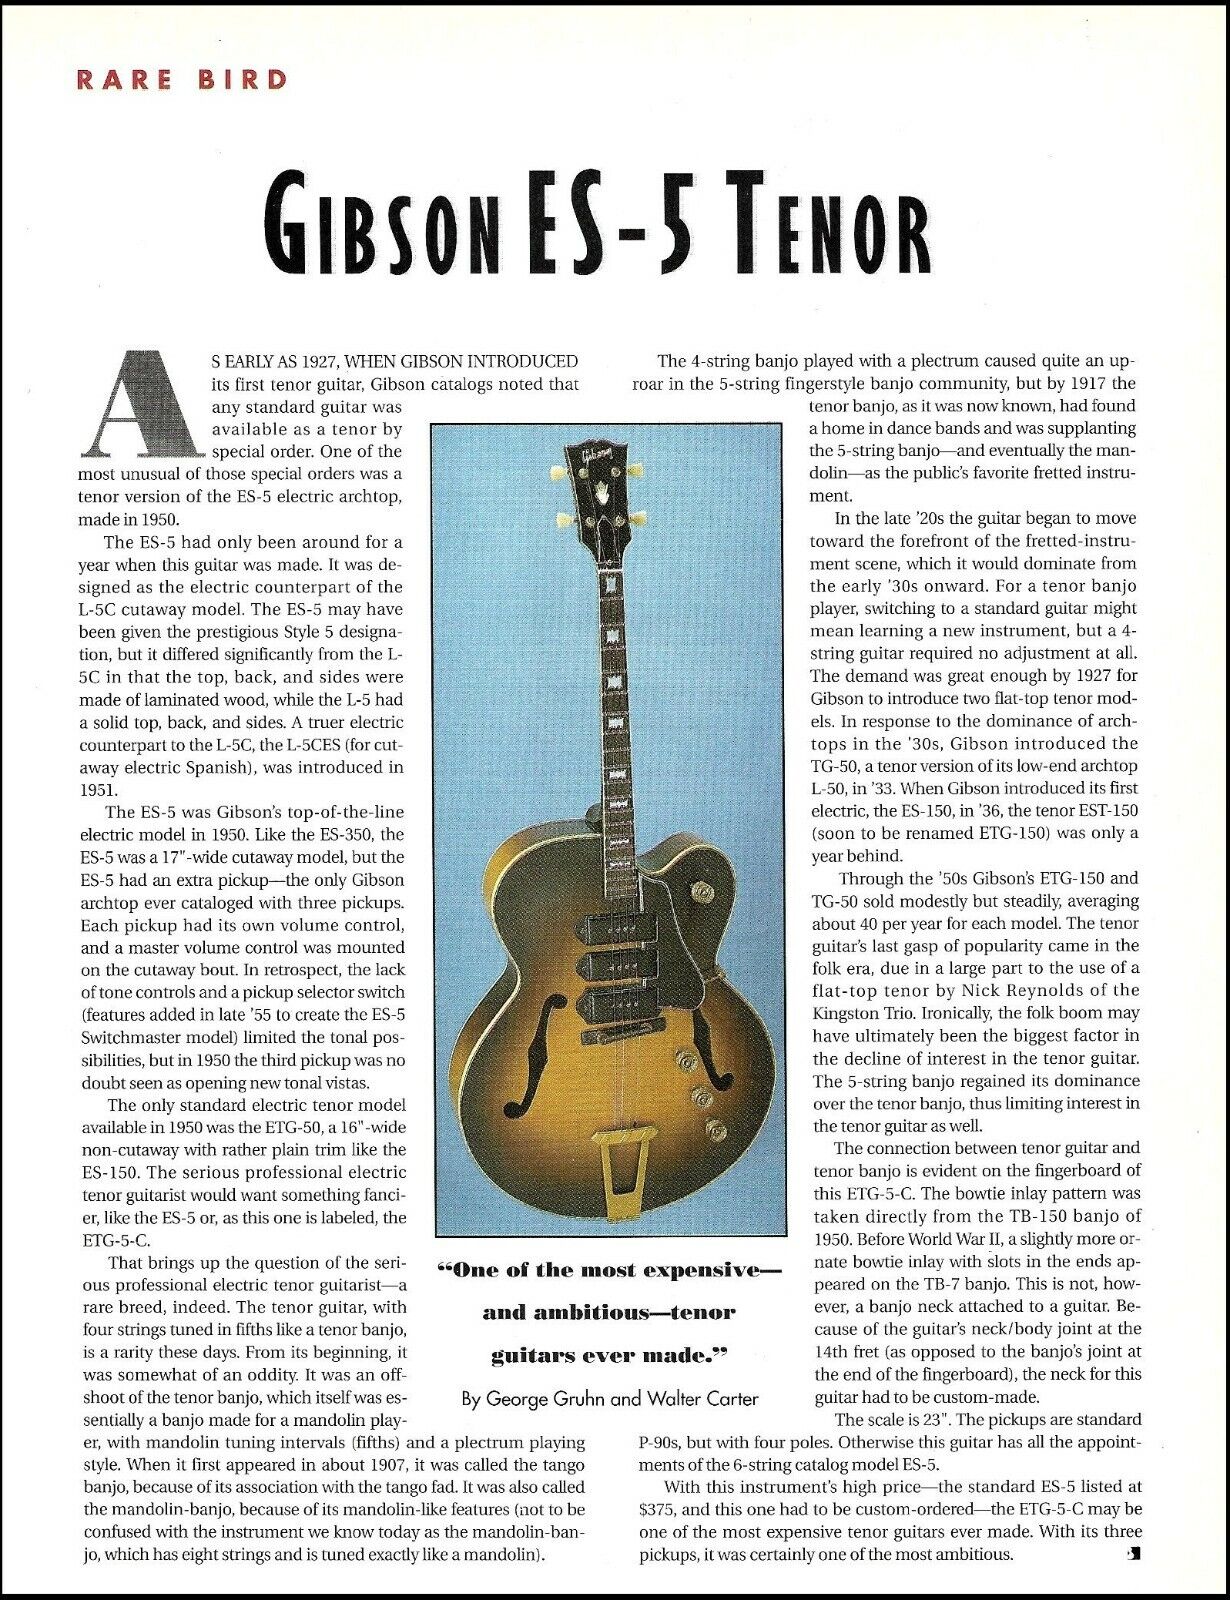 The 1950 Gibson ES-5 Tenor Guitar history article 1991 print